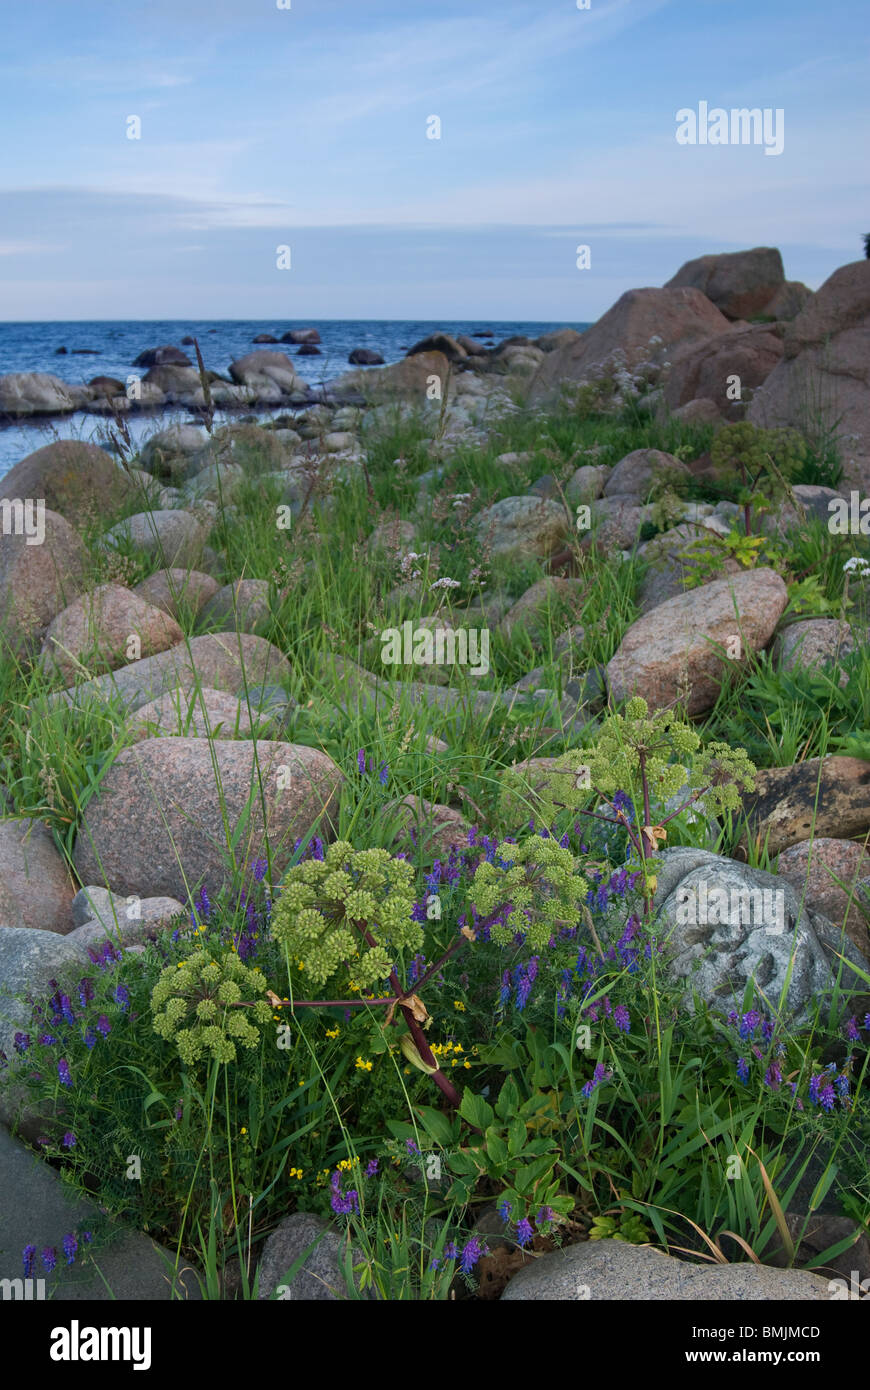 Scandinavia, Sweden, Smaland, View of angelica with sea in background Stock Photo